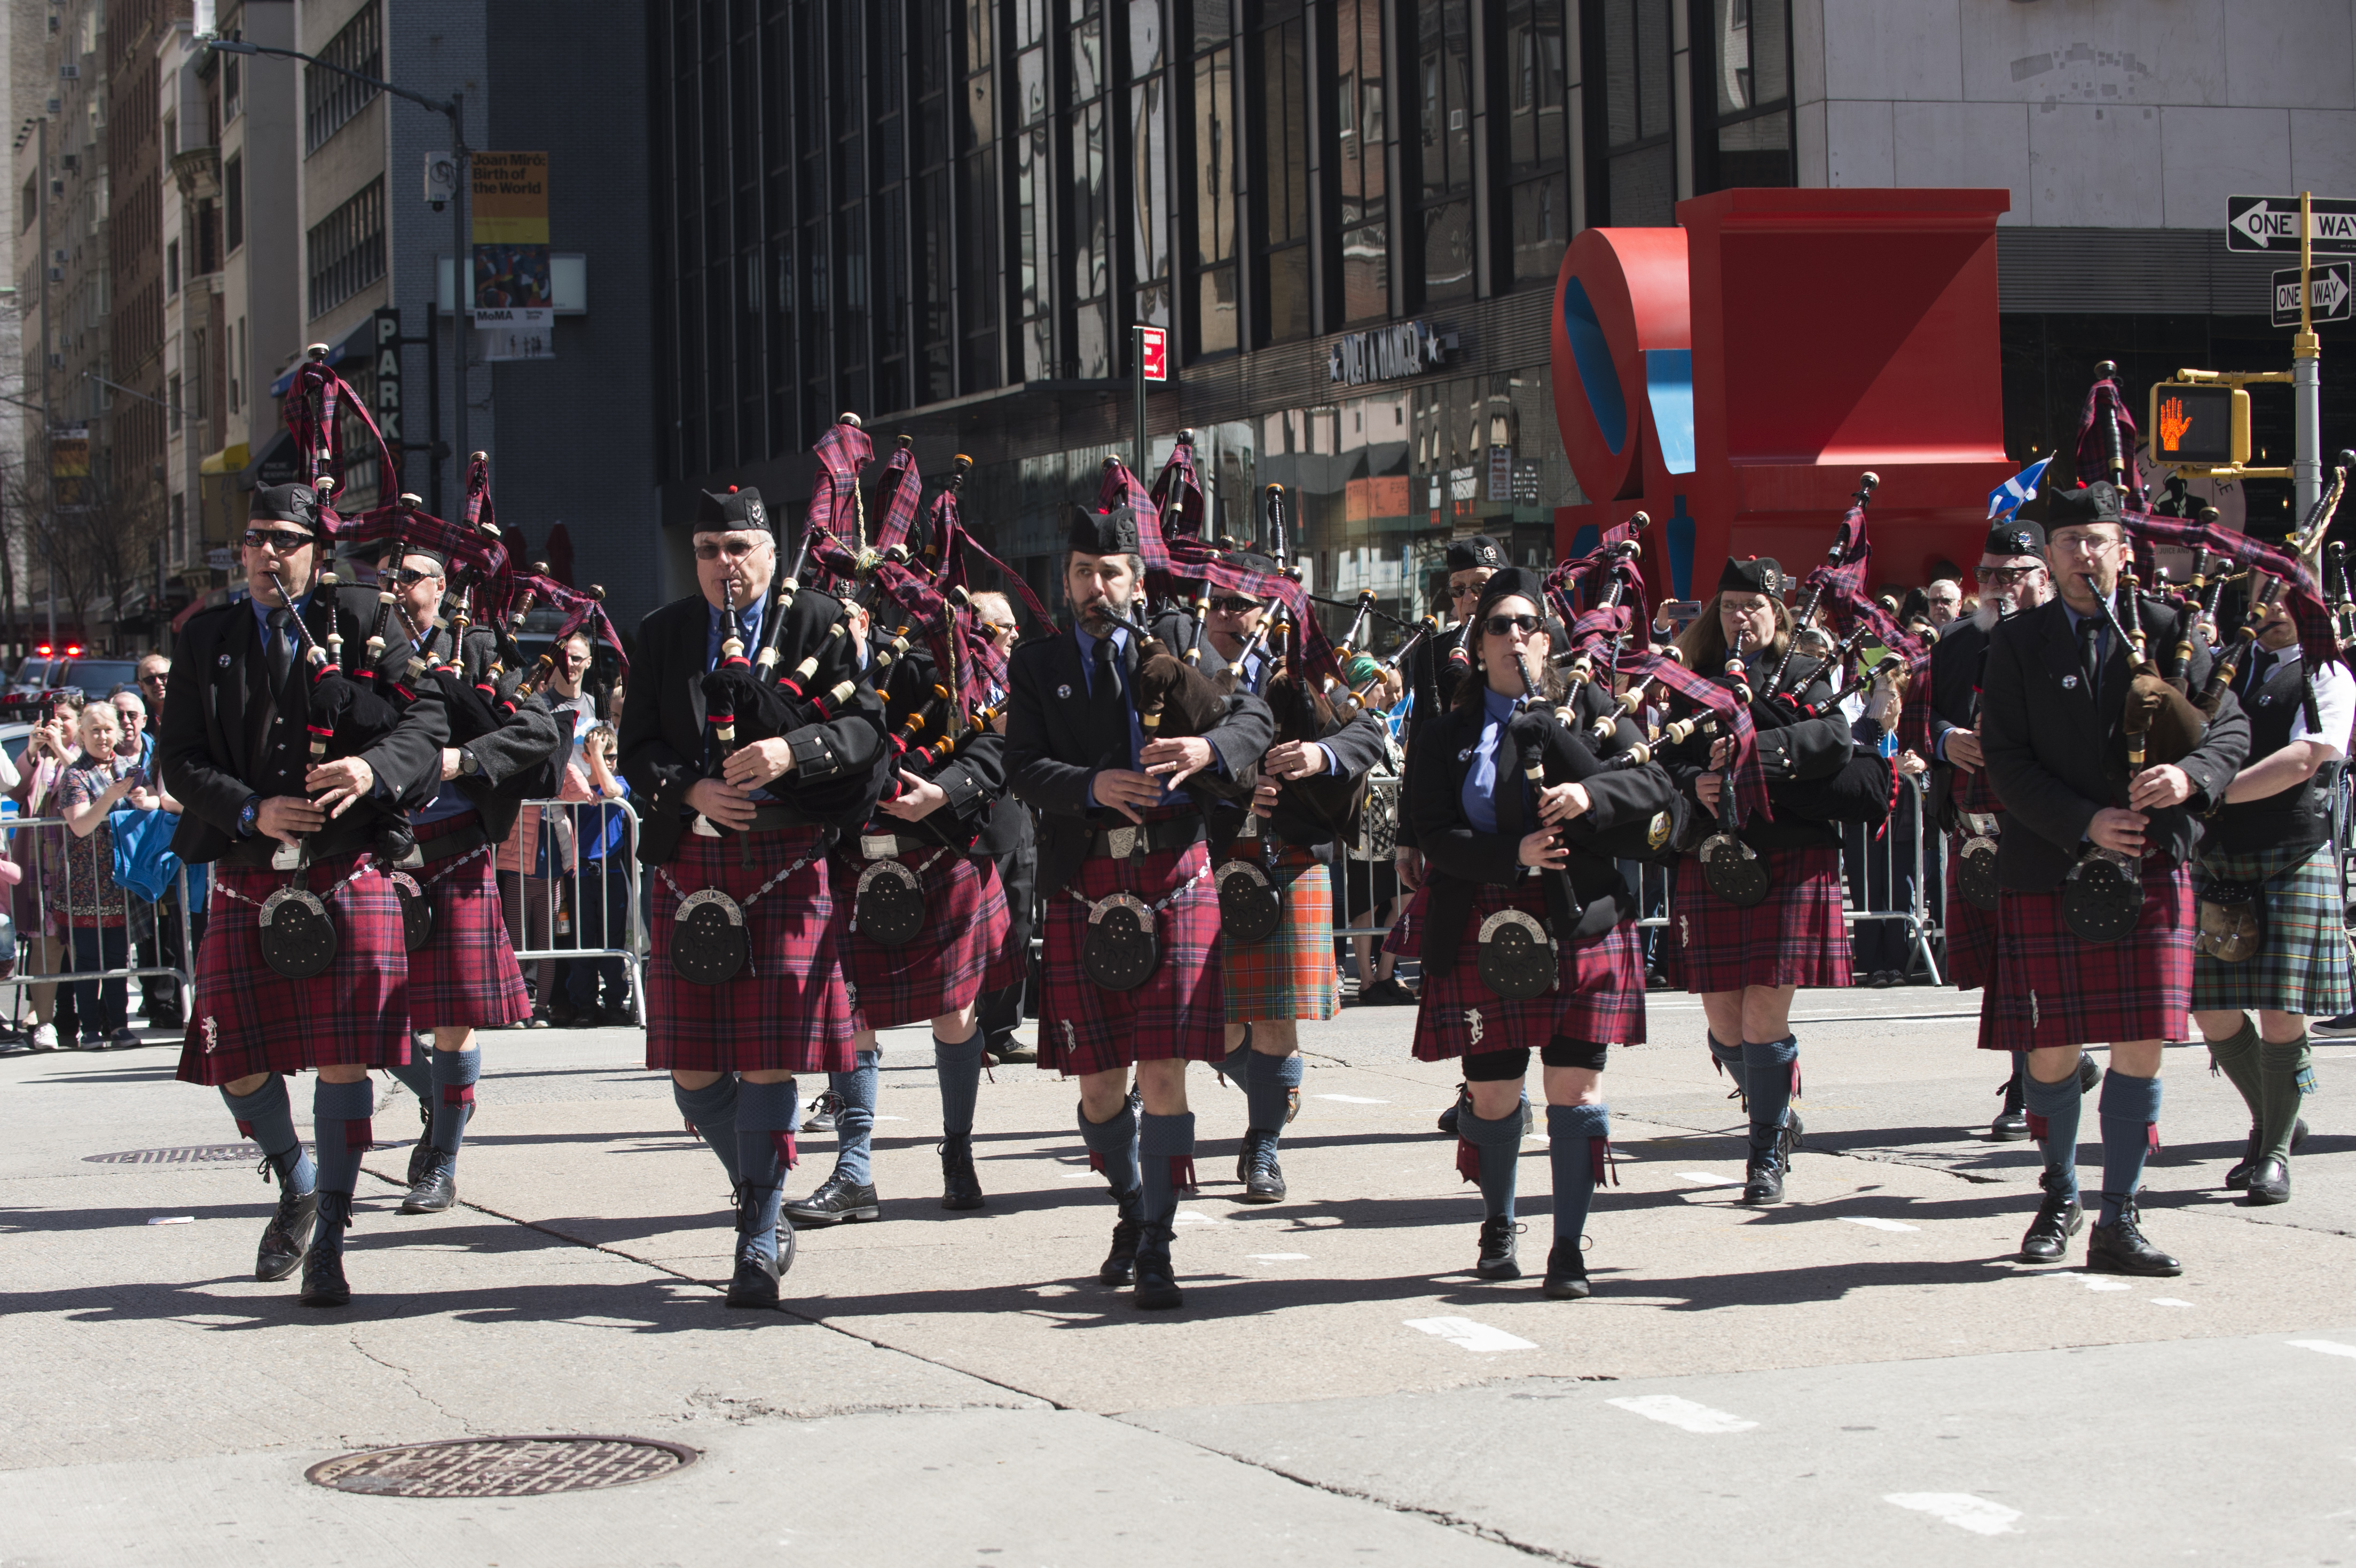 Pipe band marching in New York as part of Tartan Day Parade